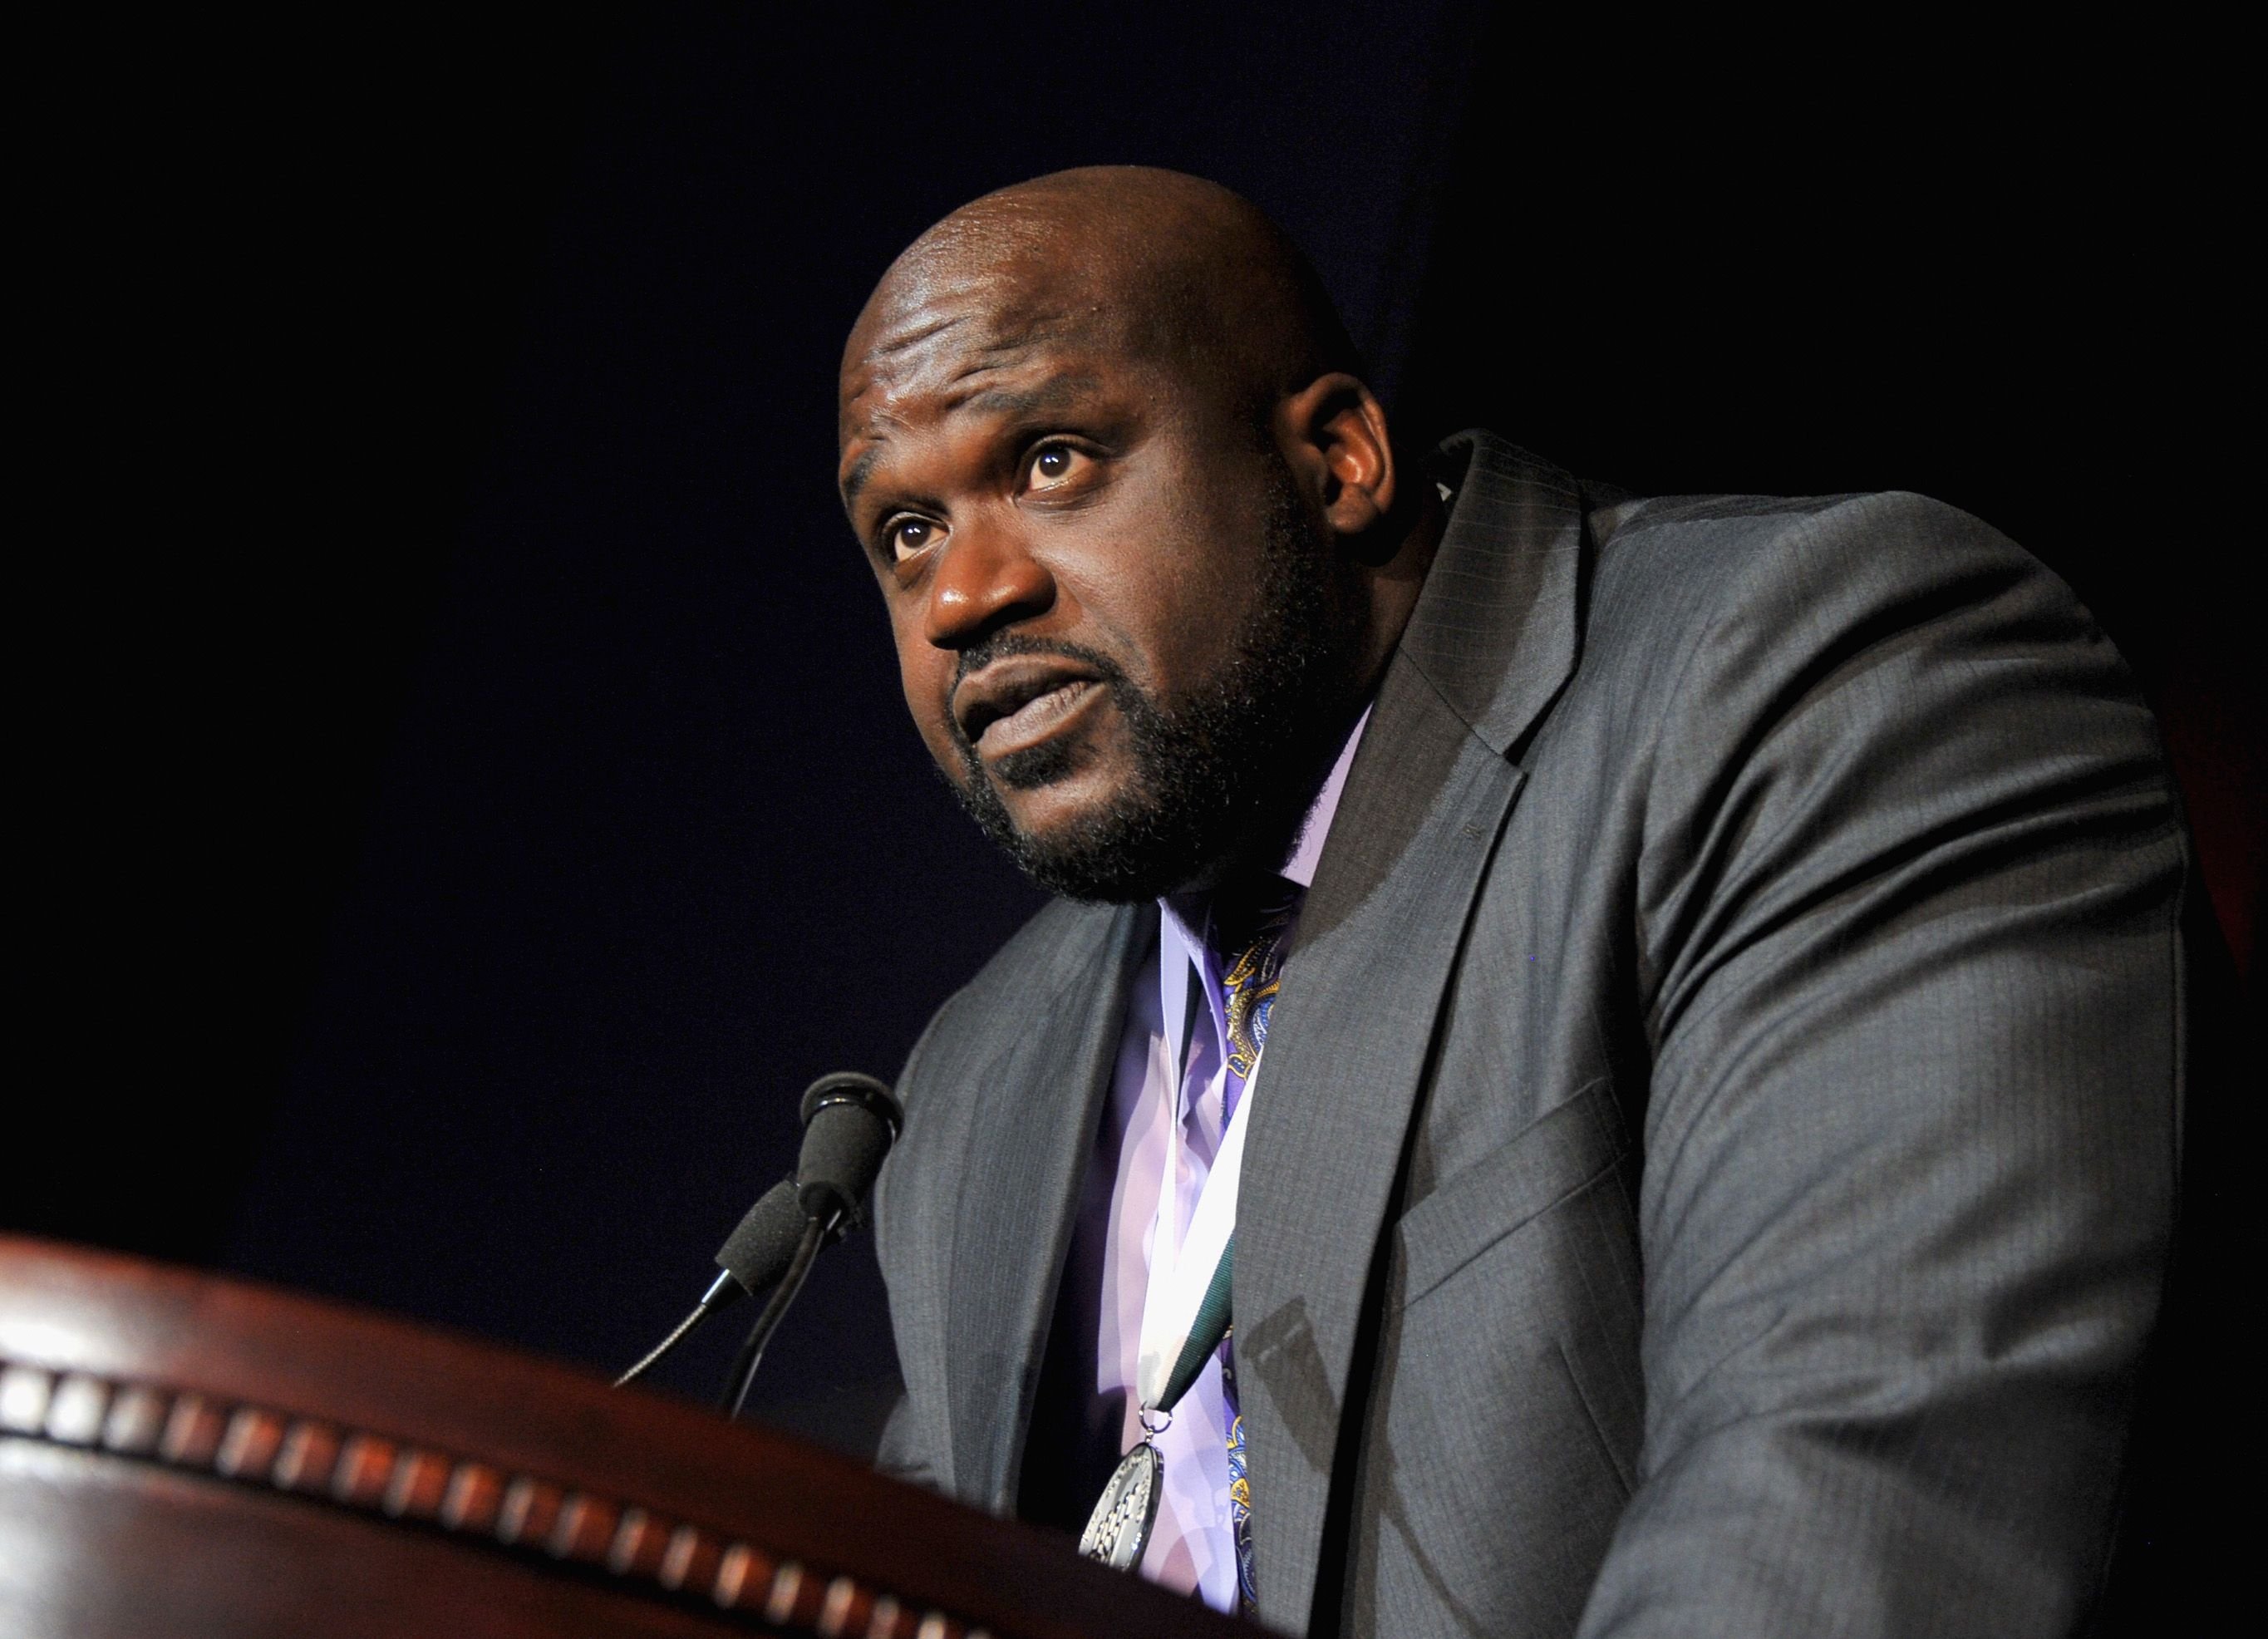 Shaquille O'Neal speaks onstage at the 27th Annual Great Sports Legends Dinner to benefit the Buoniconti Fund to Cure Paralysis at the Waldorf Astoria on September 24, 2012. | Photo: Getty Images